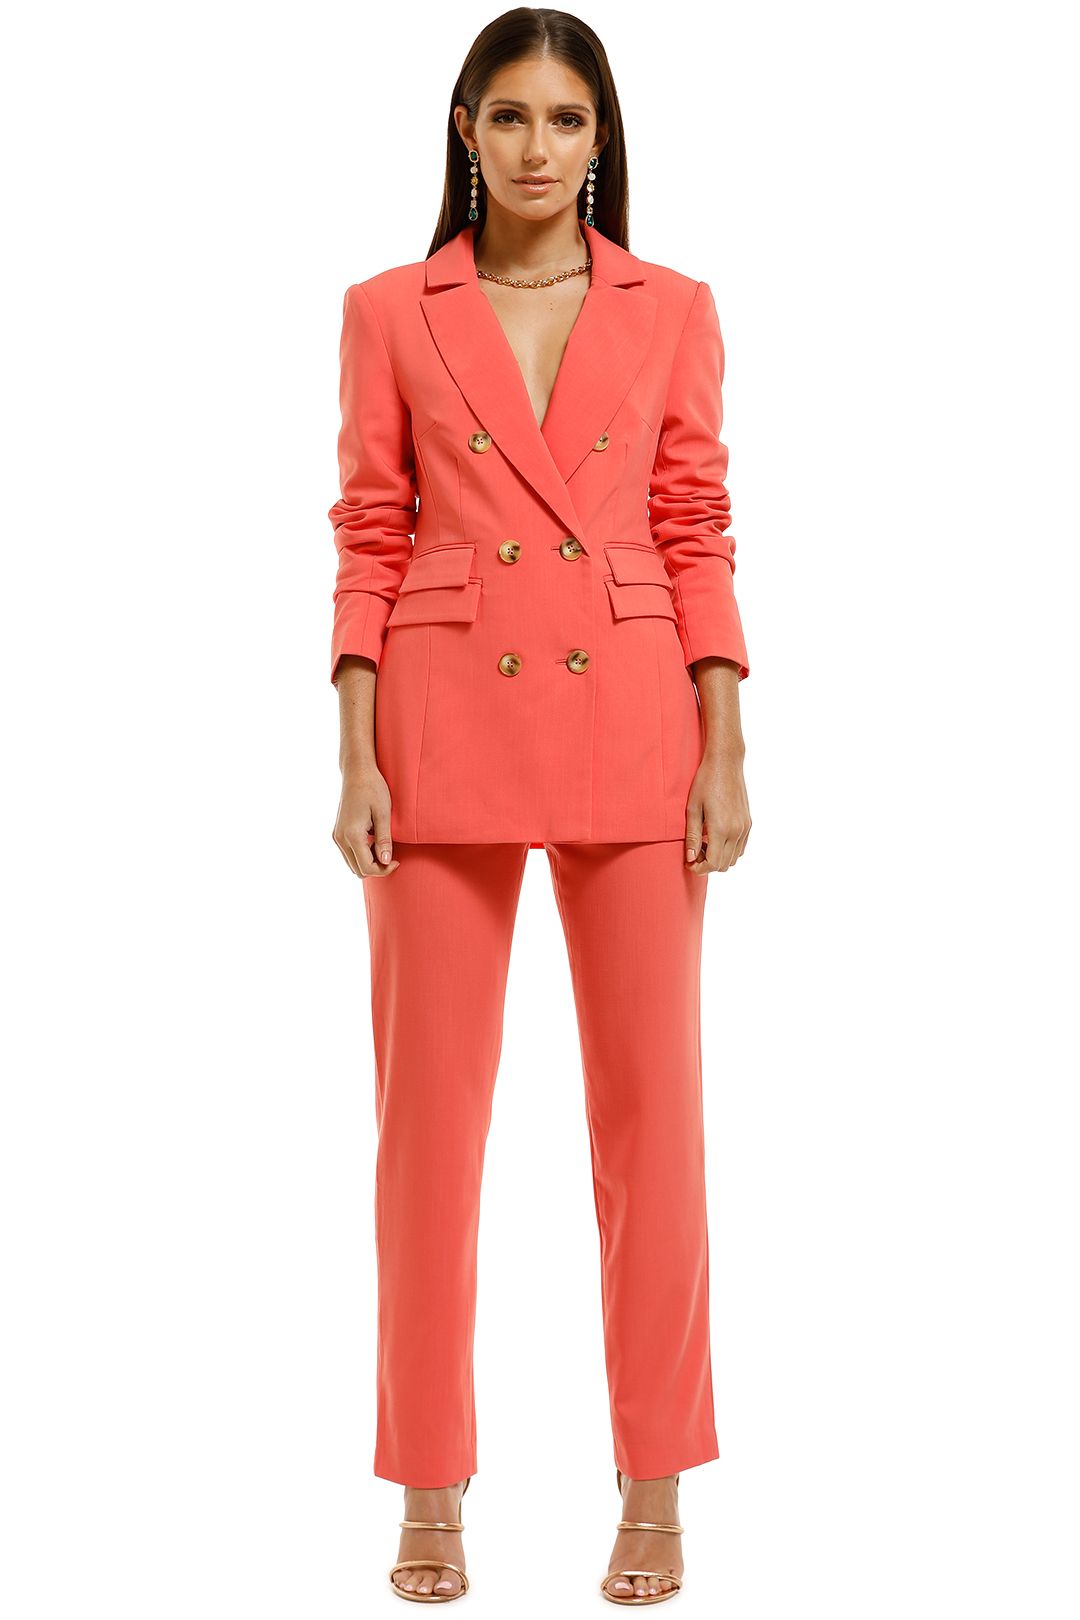 CMEO-Collective-Narrated-Blazer-and-Pant-Set-Watermelon-Front